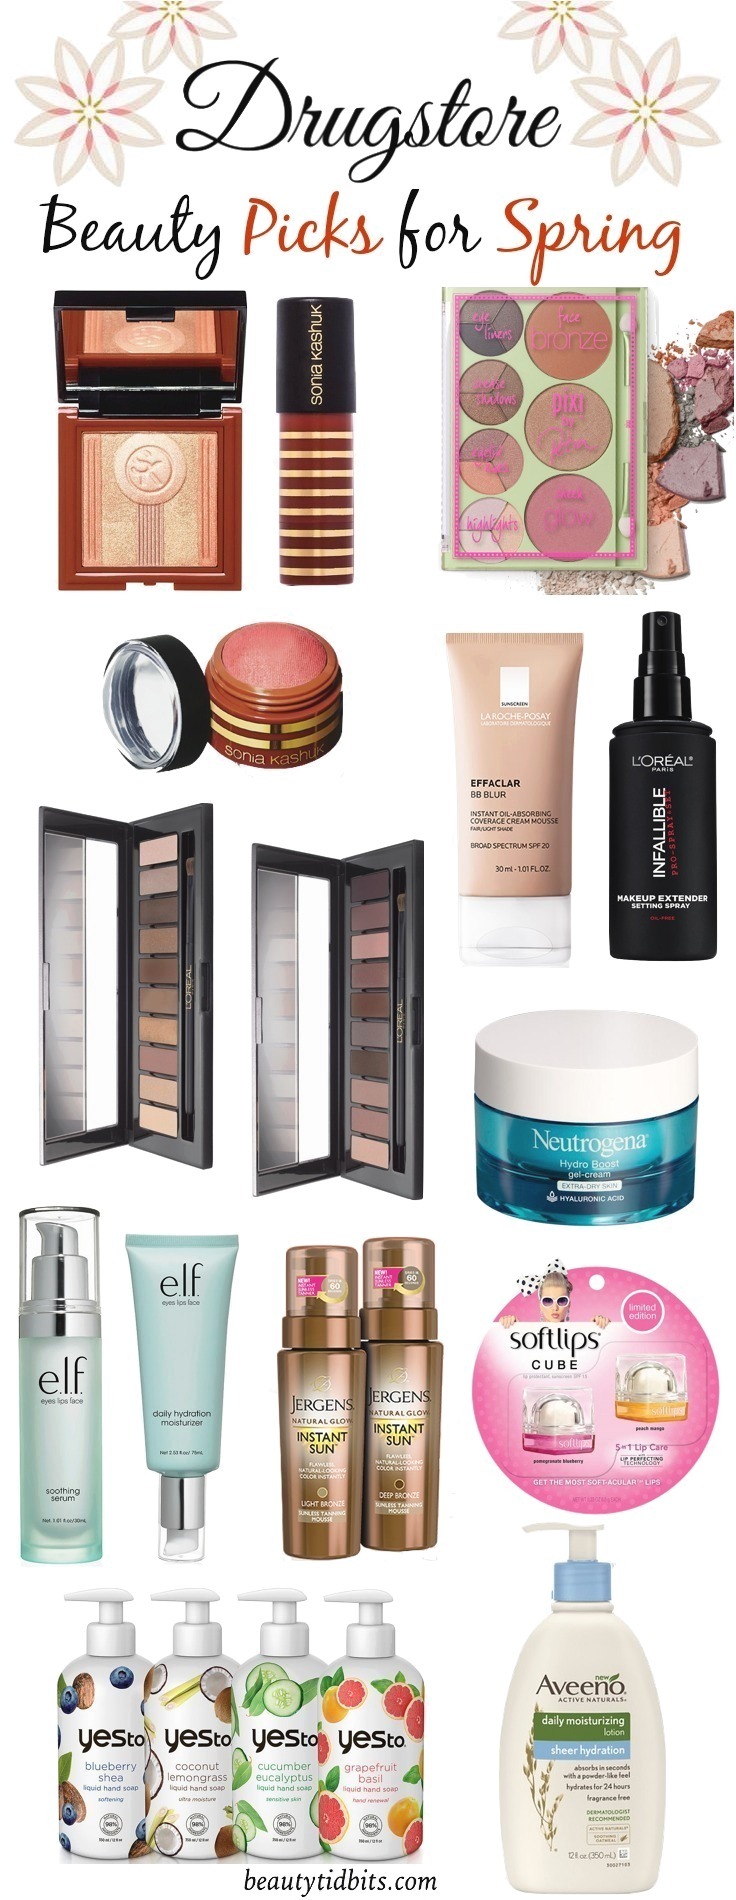 Drugstore Makeup and Beauty Picks for Spring 